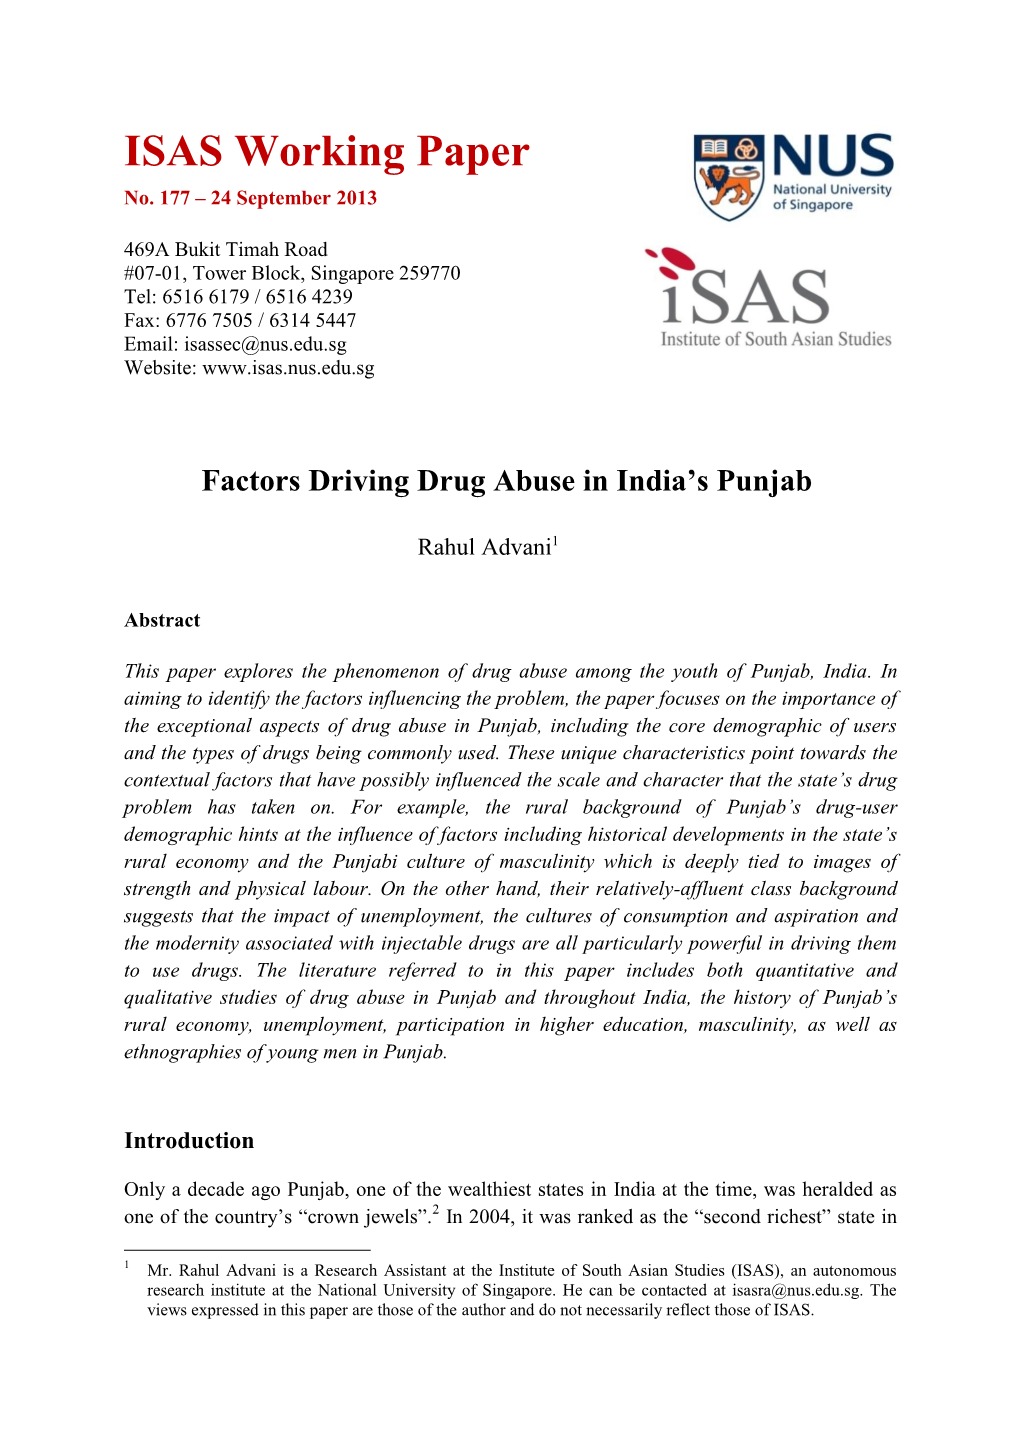 Factors Driving Drug Abuse in India's Punjab